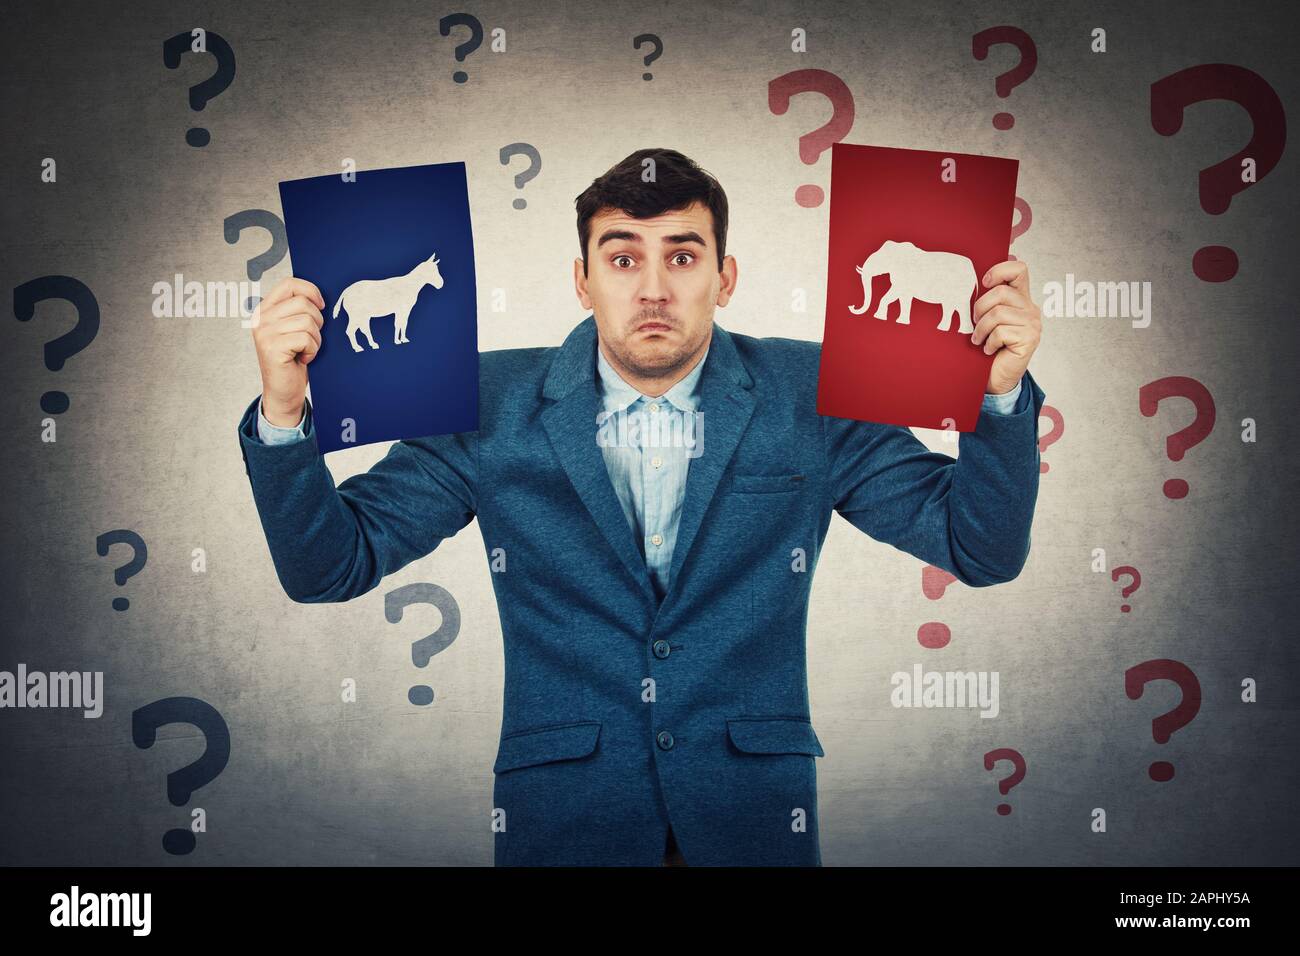 Undecided young man holding two brochures has to choose between donkeys and elephants. Perplexed and confused person with question marks around head. Stock Photo